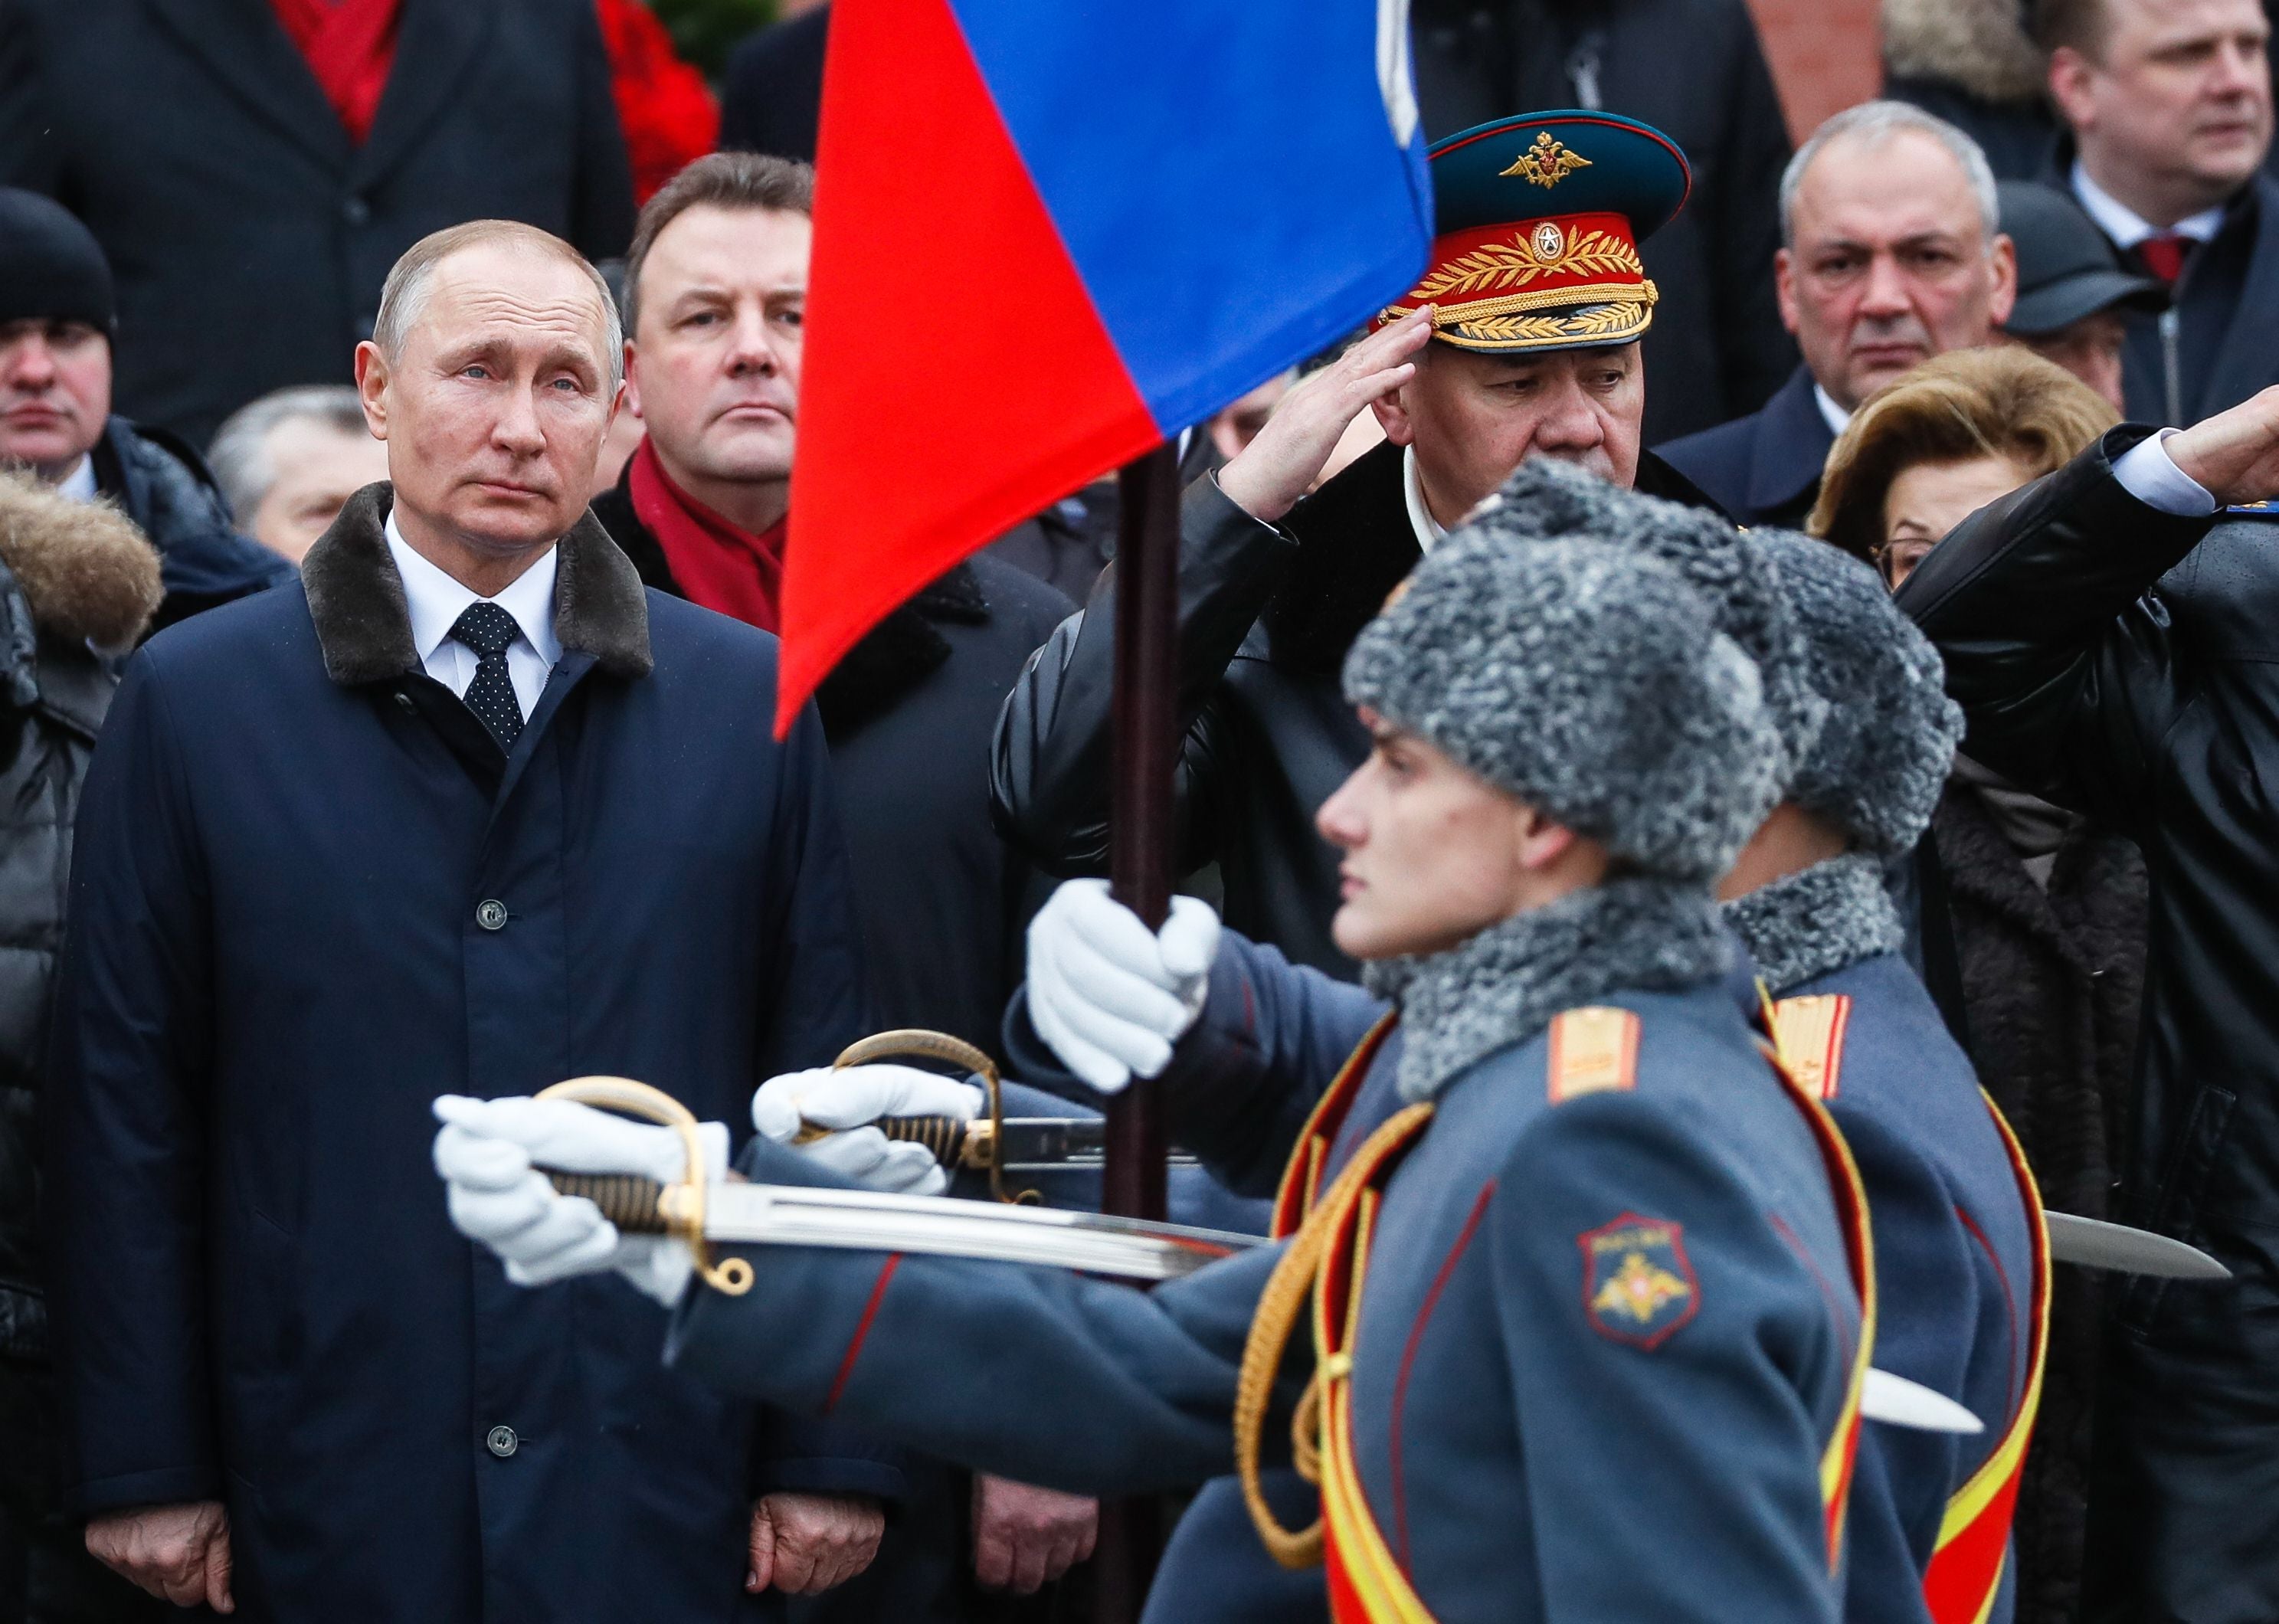 With Russia at war in Ukraine, this year’s Victory Day parade has been keenly anticipated abroad